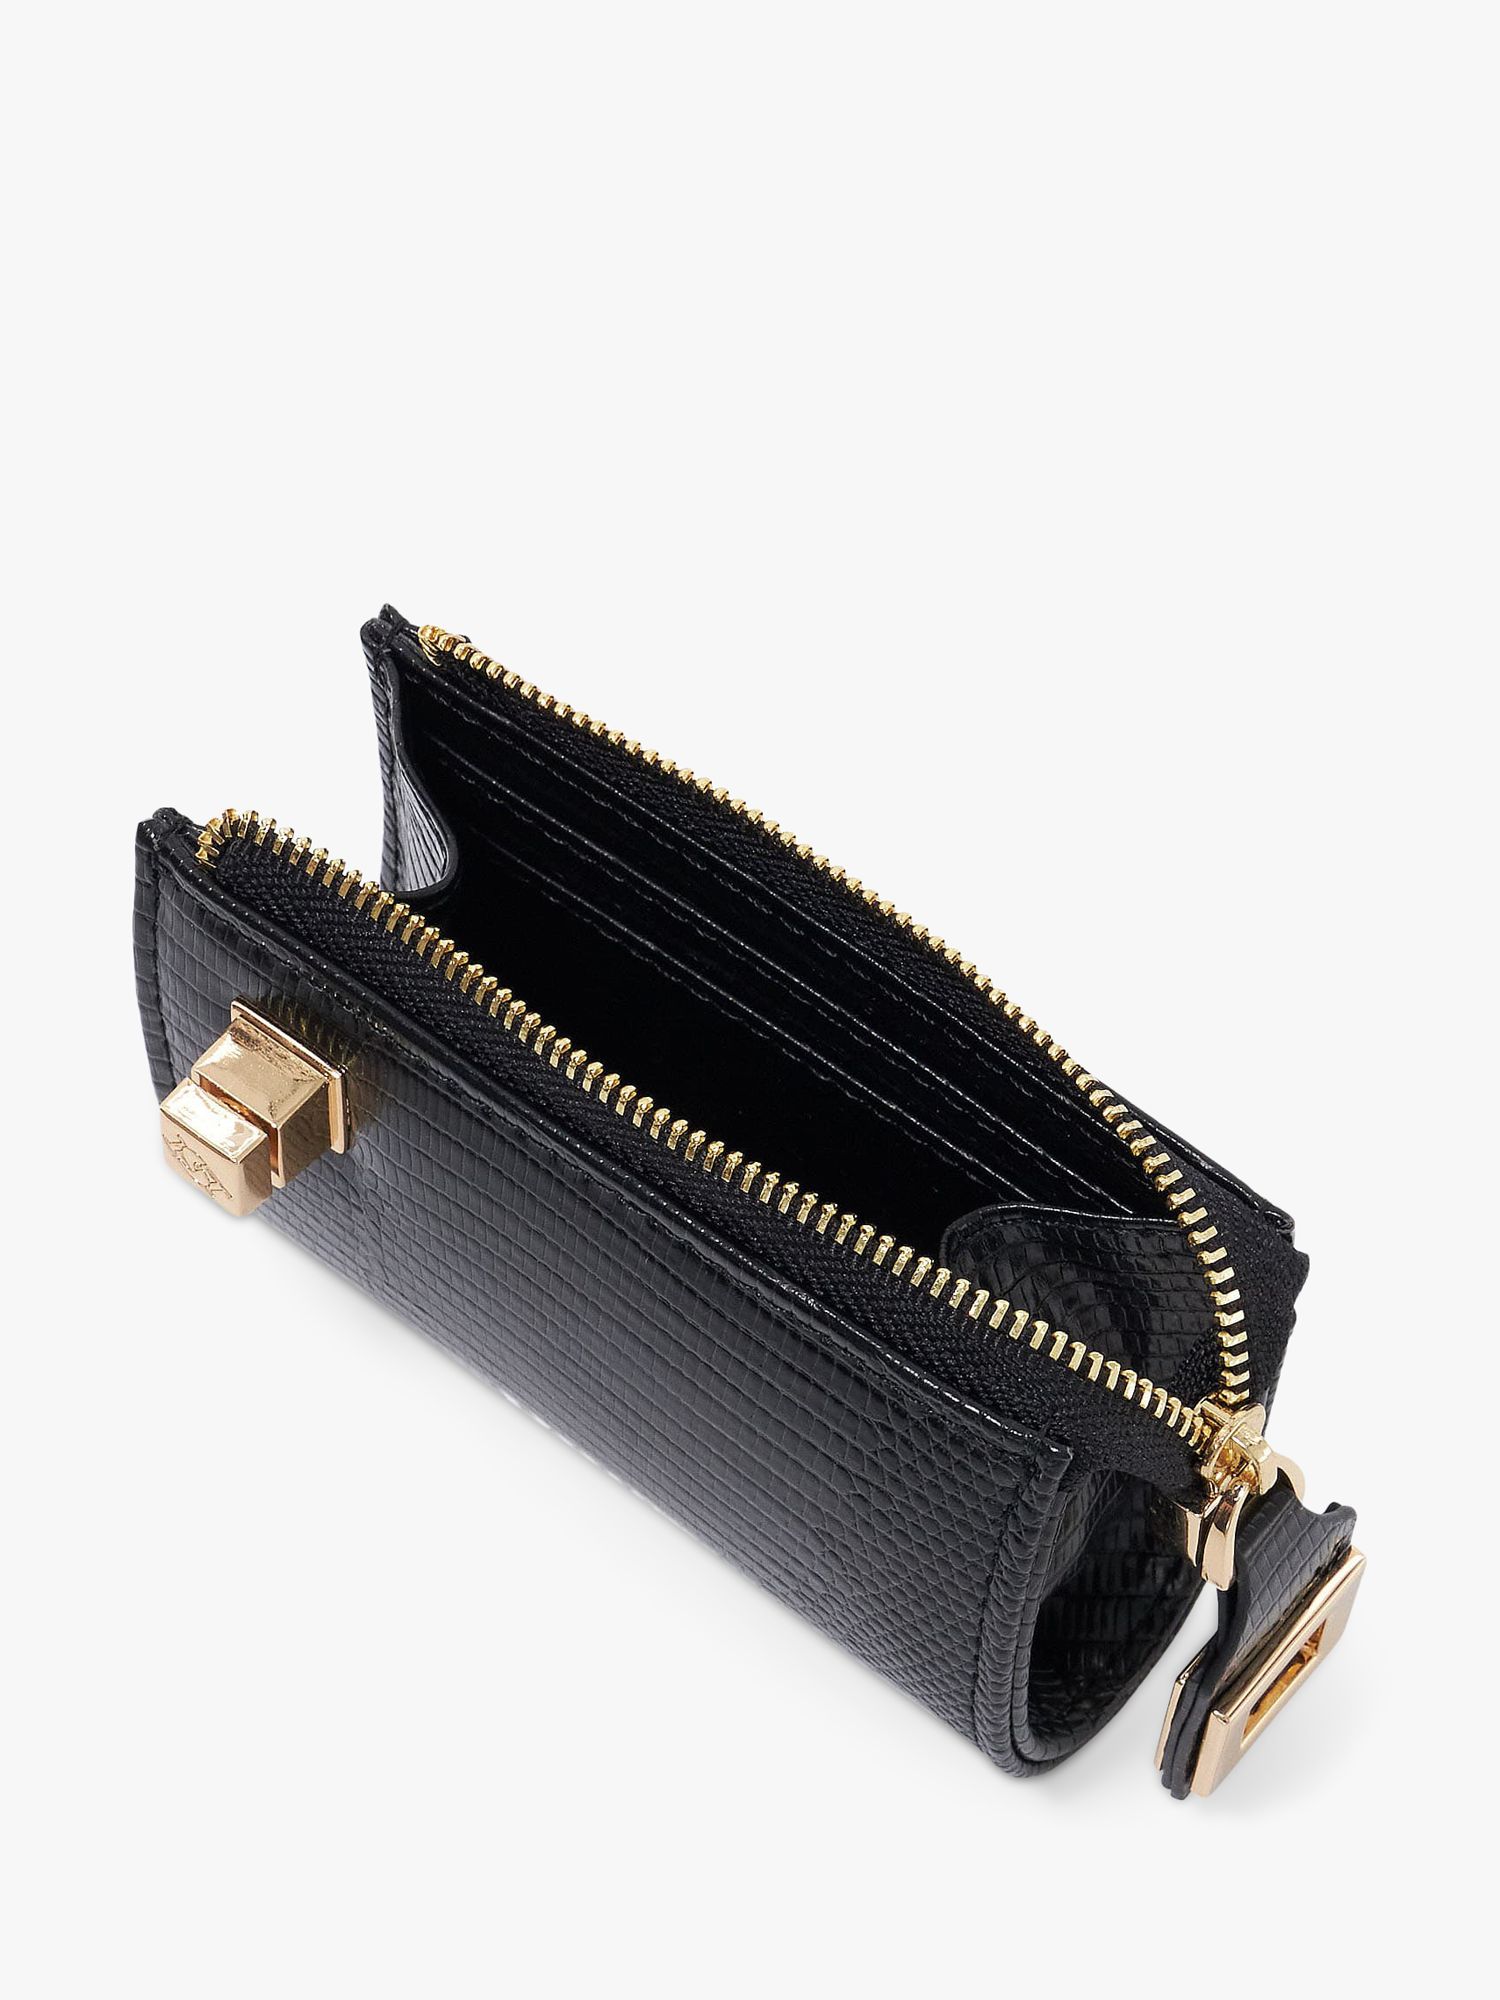 chloé turn lock wallet - clothing & accessories - by owner